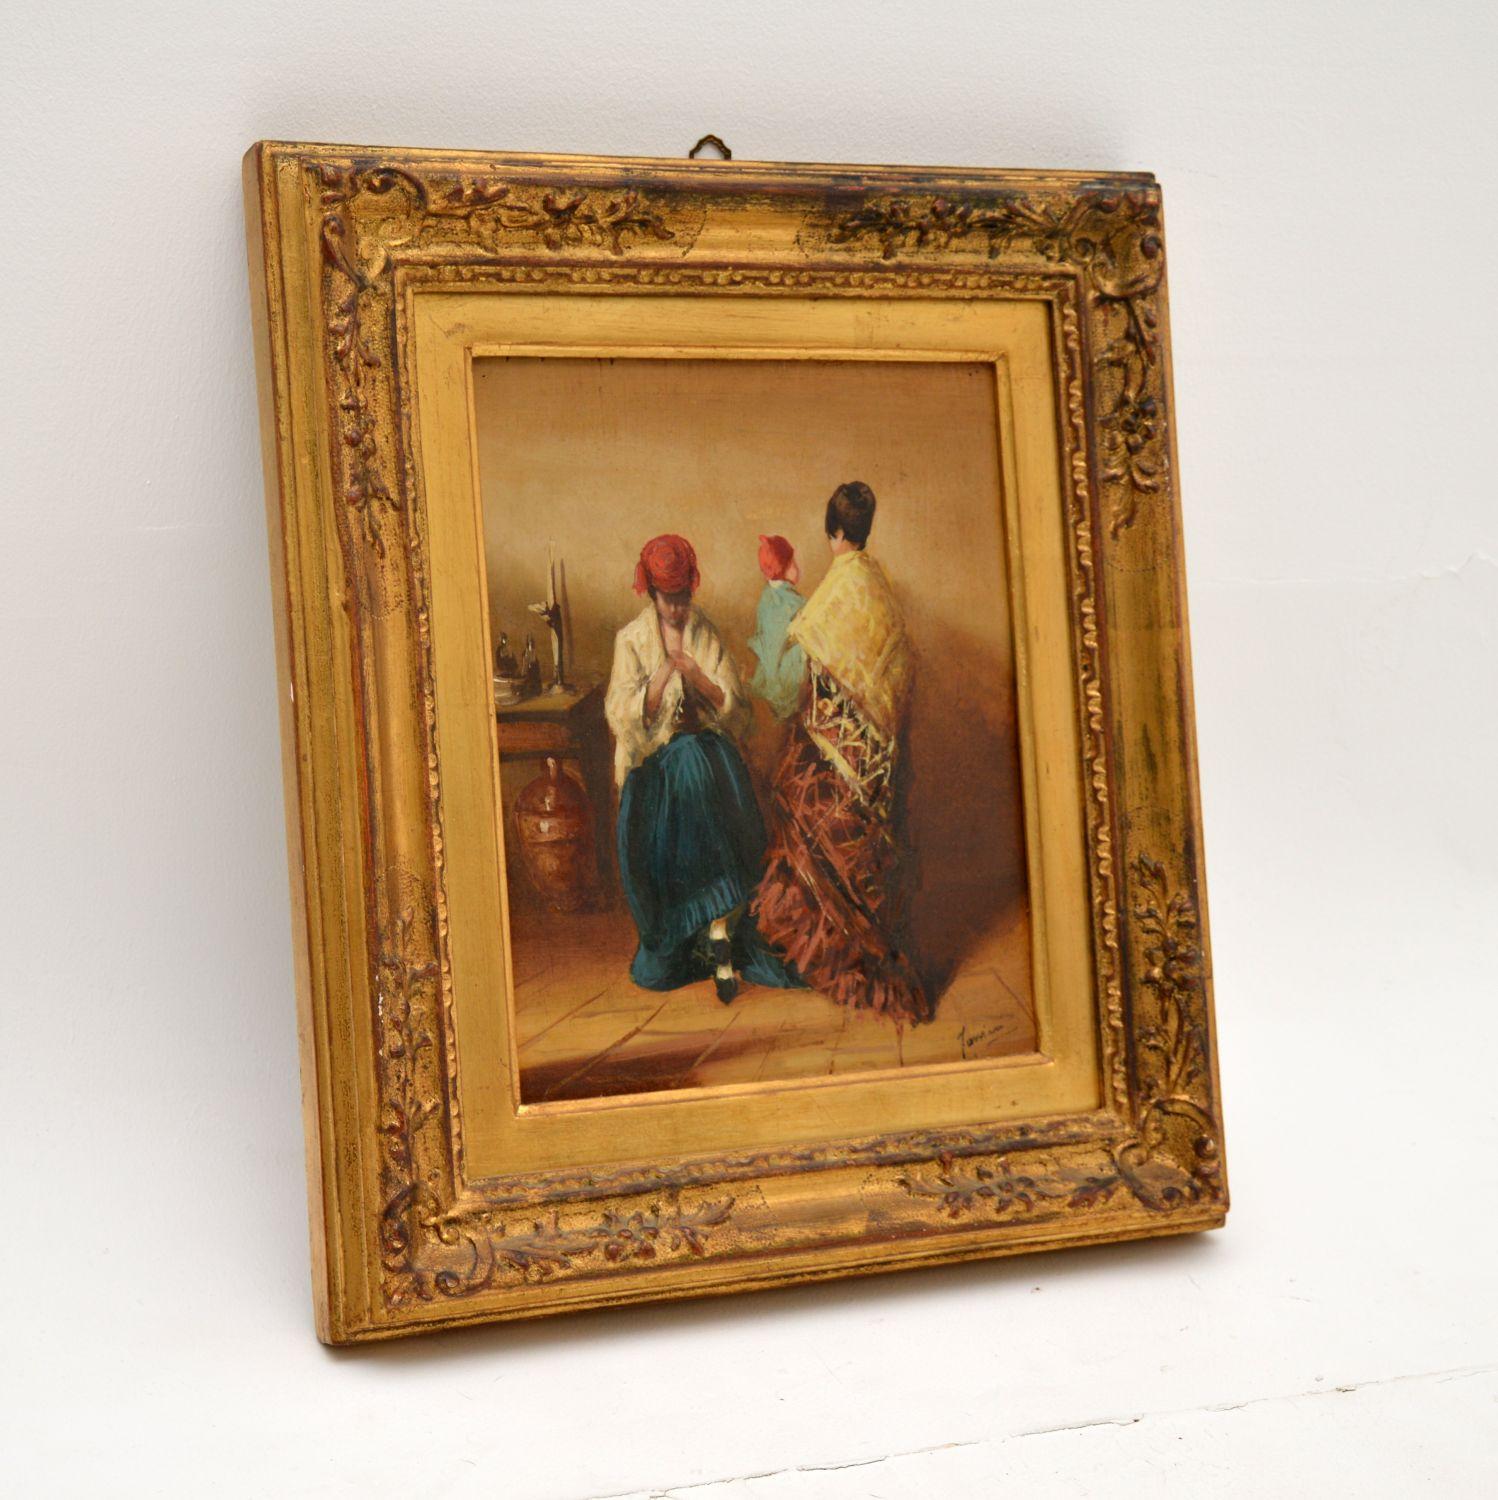 An absolutely gorgeous antique oil painting in a wonderful gilt wood frame. It likely dates from around the 1900-1920 period, possibly earlier. We are not sure of the origin, but the subjects look like Spanish women, so we would guess it to be